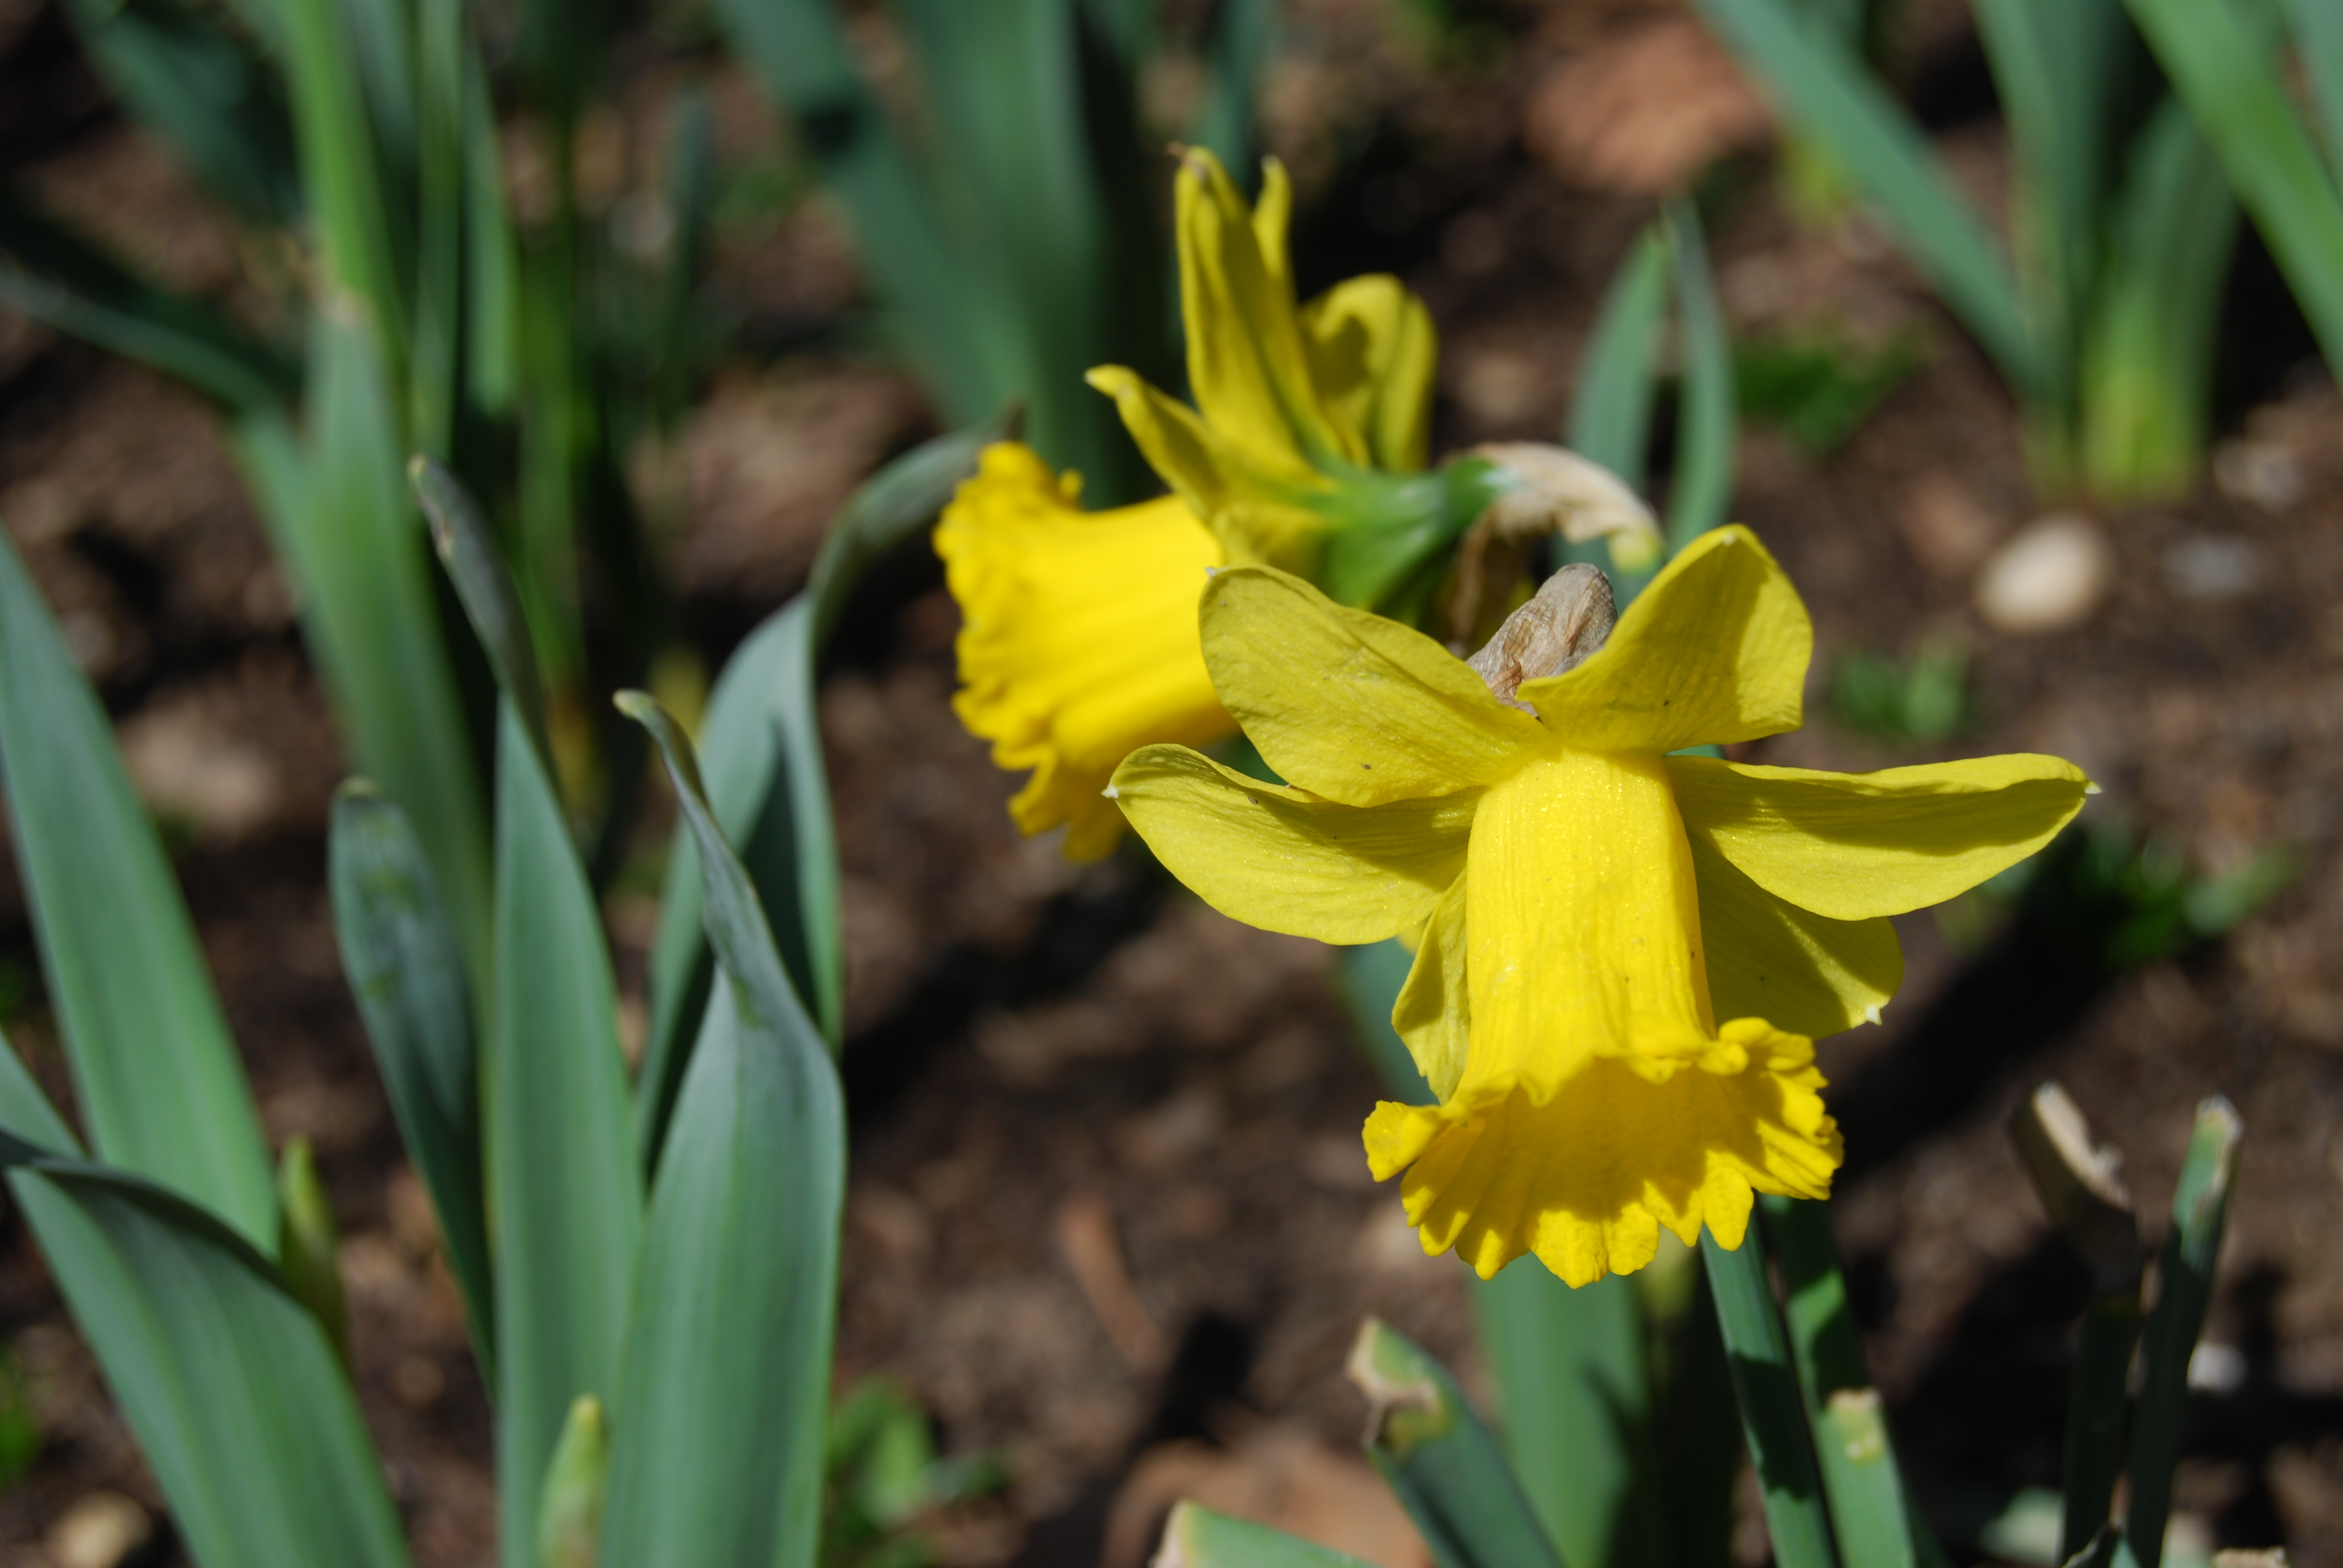 Very Early Blooming Daffodils - Madison Square Park Conservancy